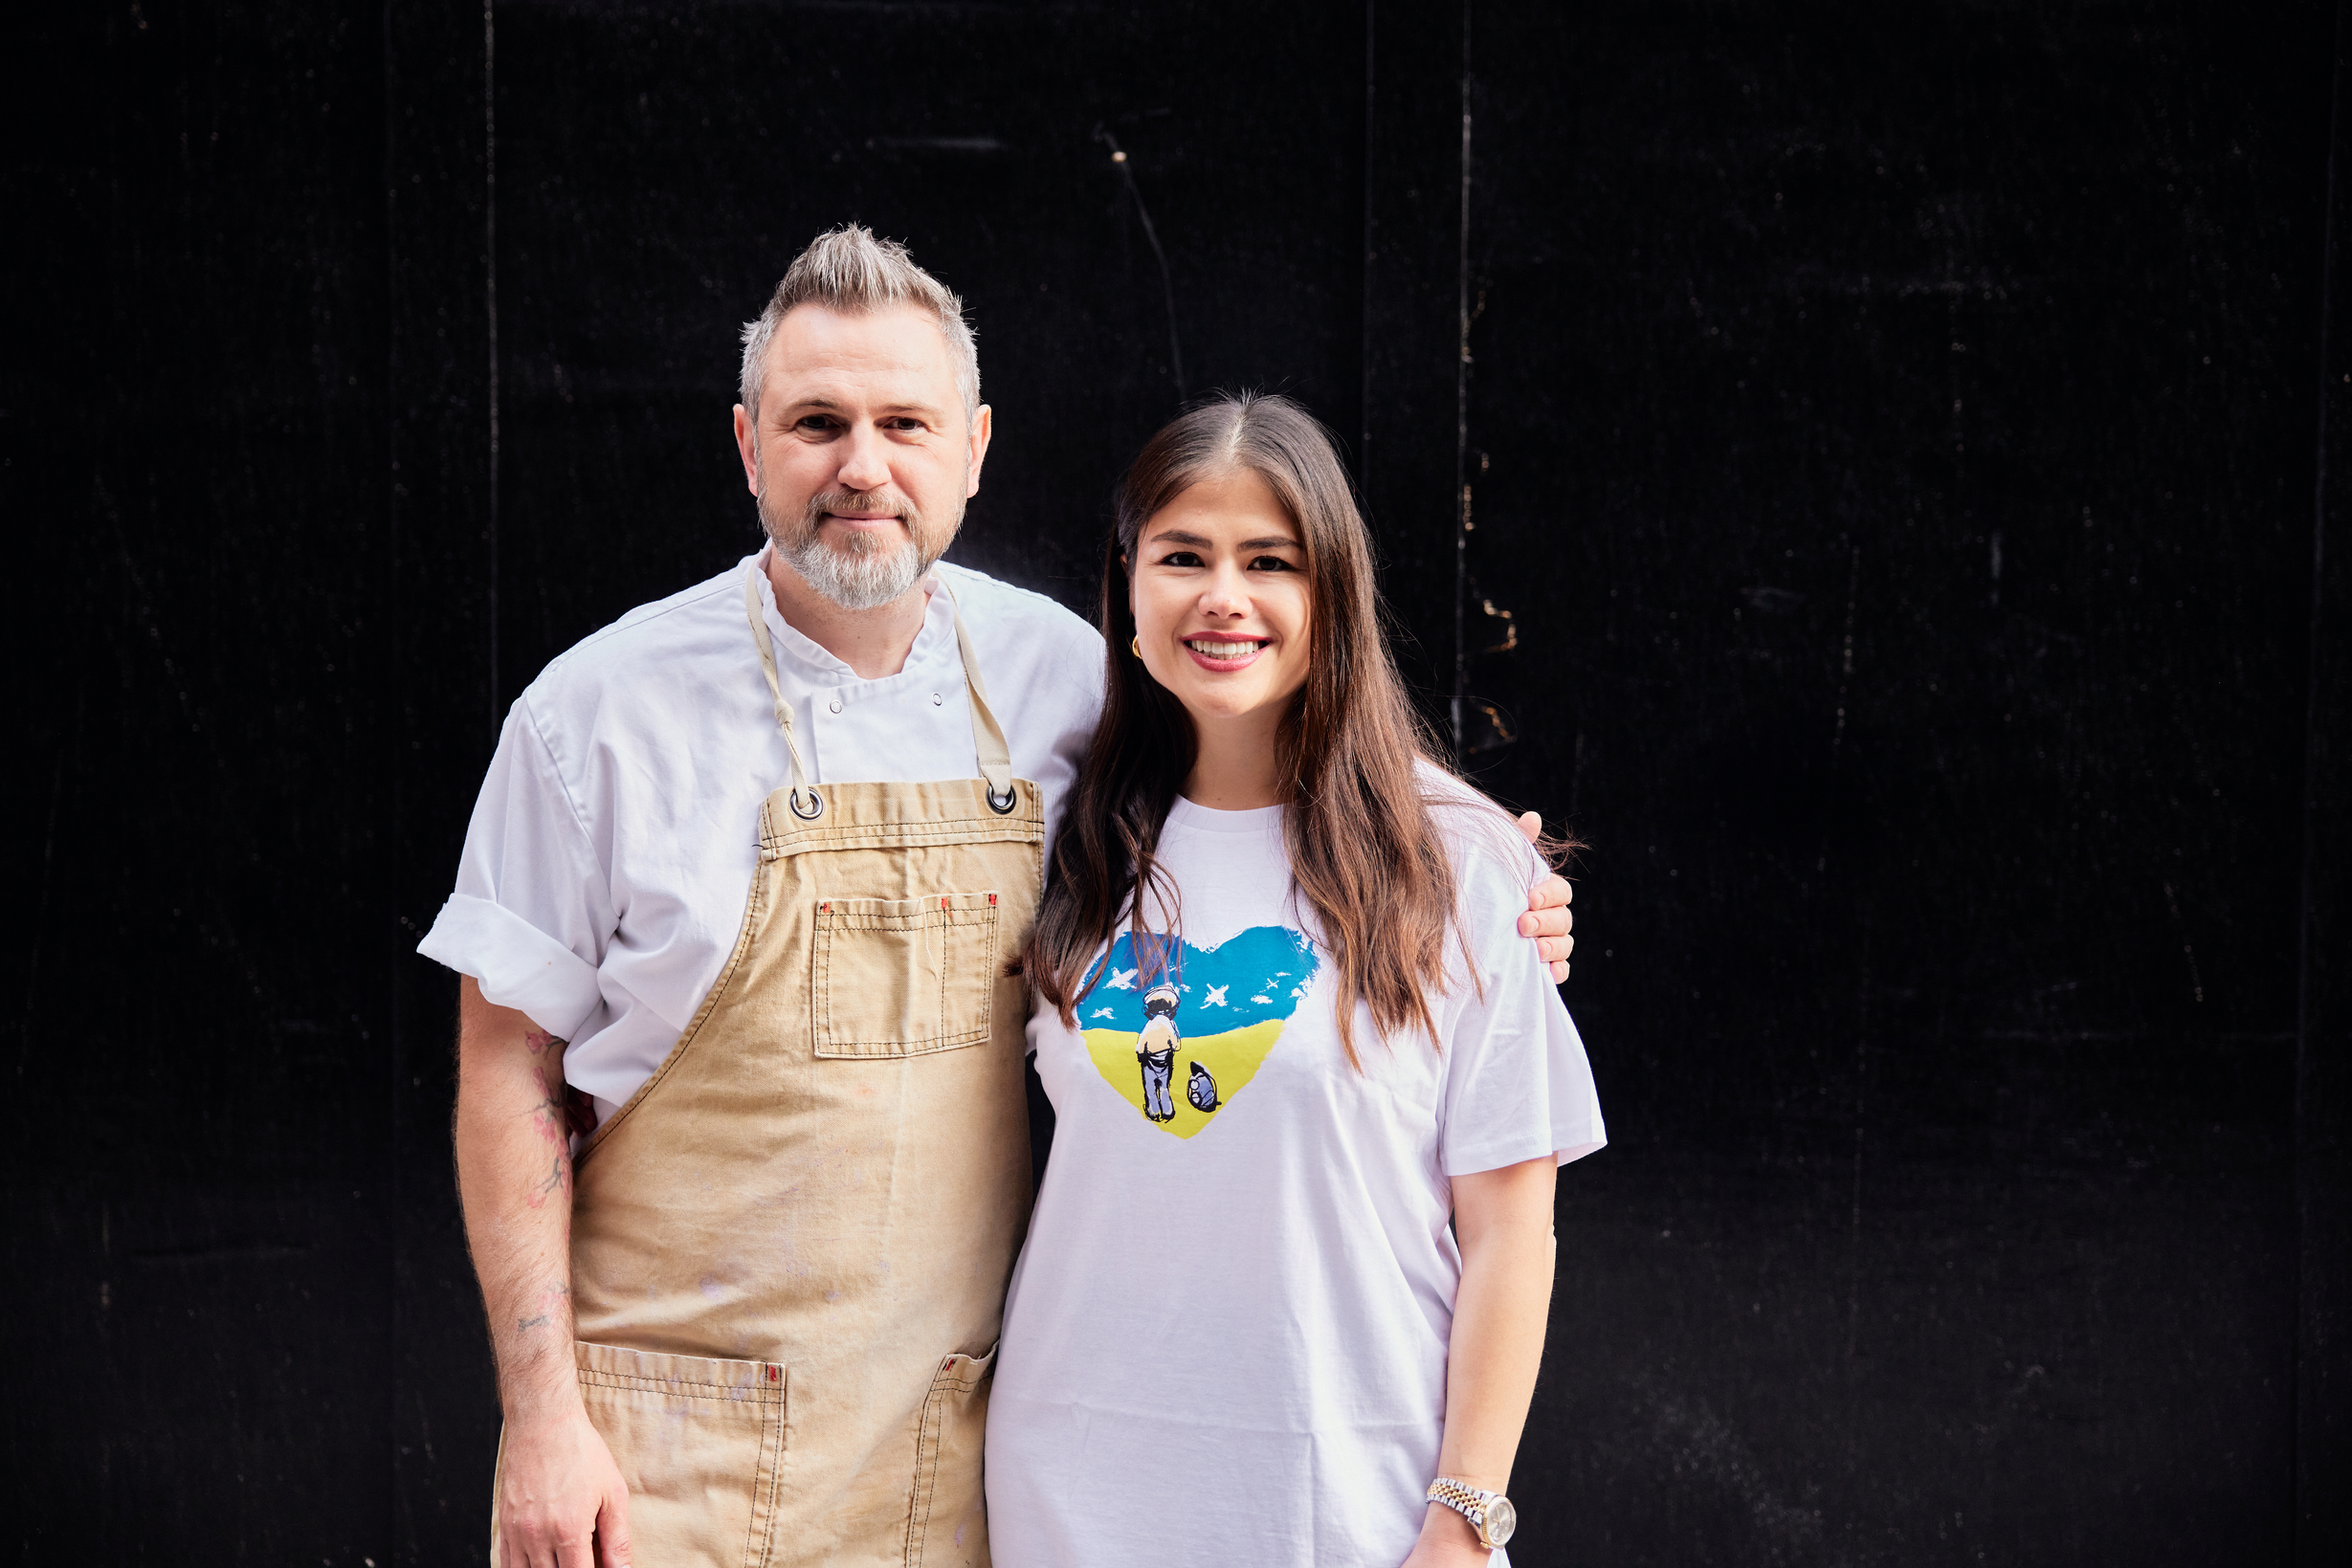 Ukrainian chef to open London restaurant staffed by refugees